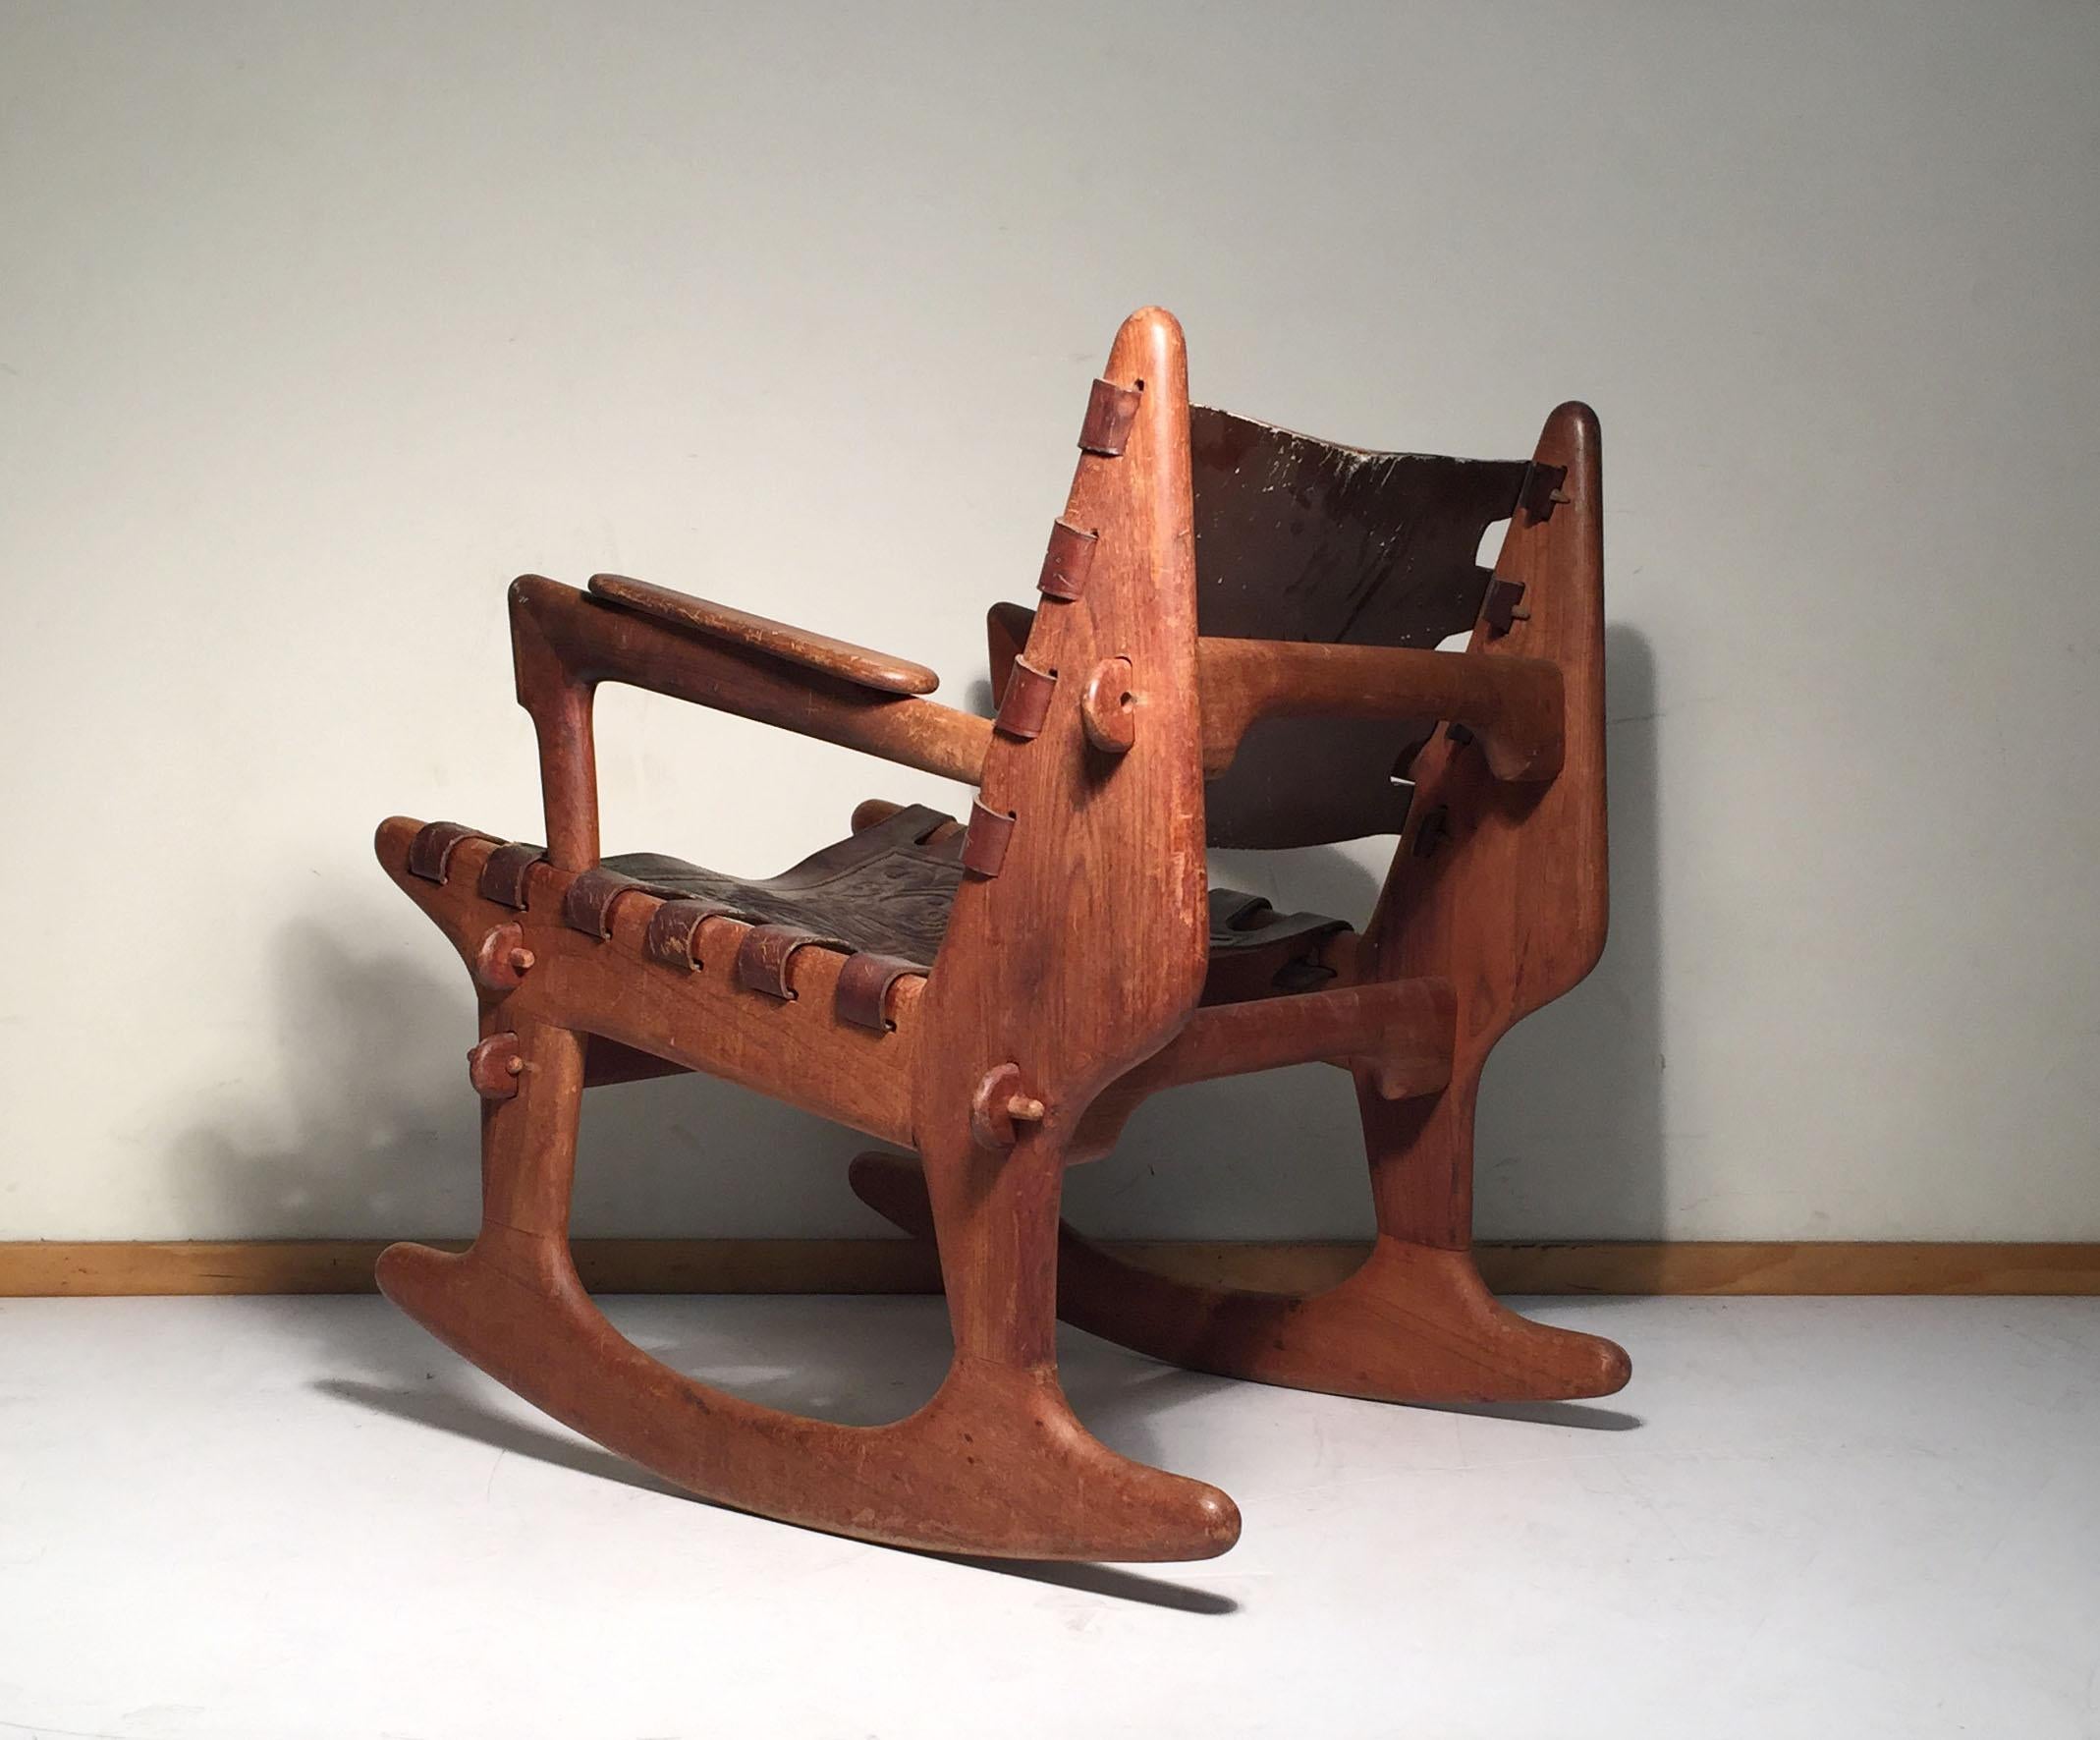 Vintage rocker by Angel Pazmino. Untouched . In original finish with tooled leather backrest and seat. Fully signed.
In the style of Adrian Pearsall.

Can use some oil to just freshen up the wood.